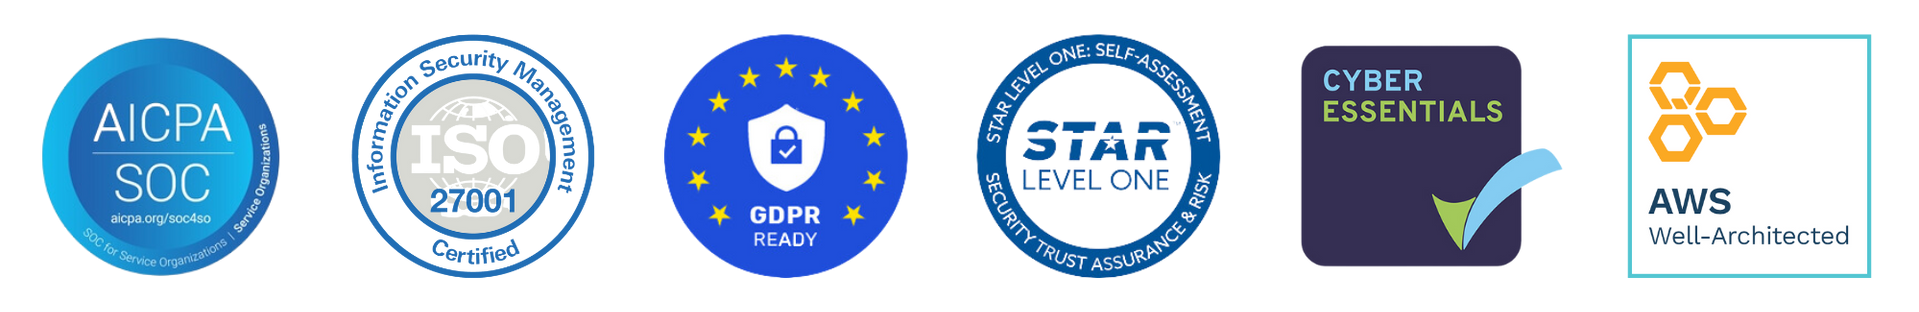 Security logos including: SOC, ISO, GDPR, Star, Cyber Essentials and AWS